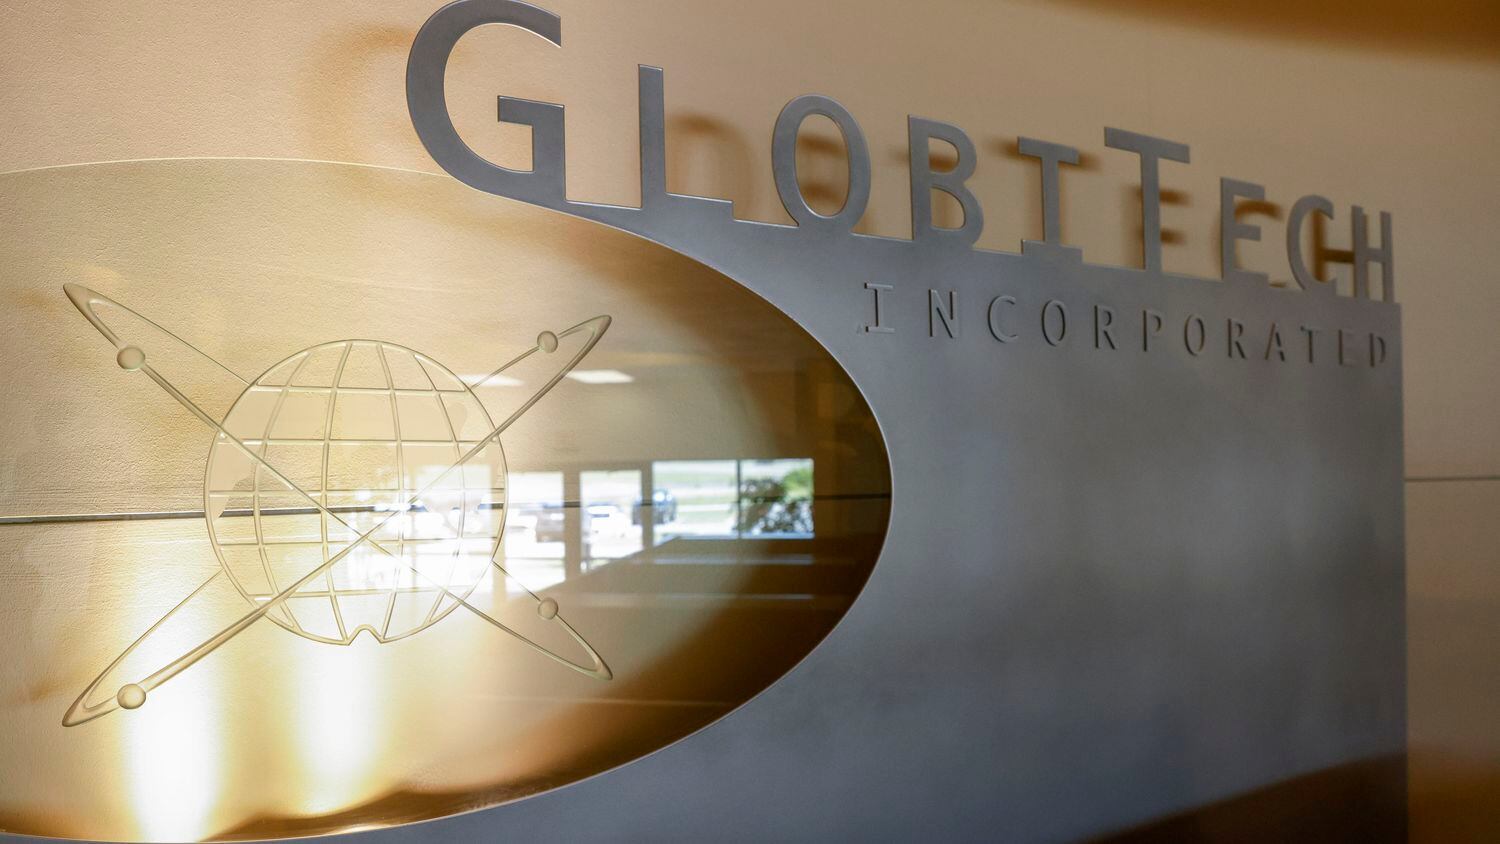 GlobiTech's parent company, GlobalWafers, is the latest semiconductor investment being drawn...